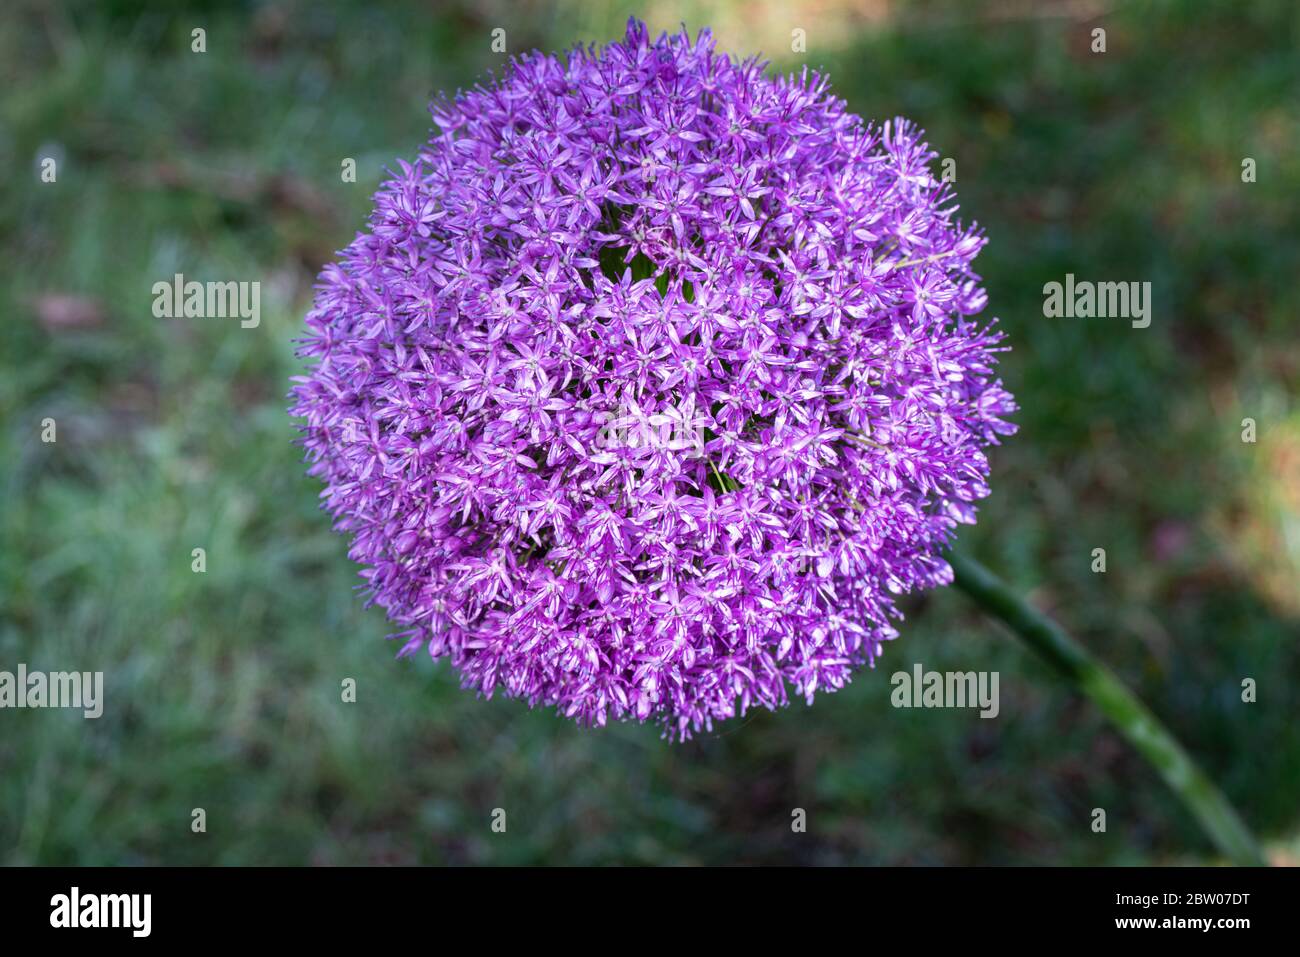 Long shot of a flower umbel of a ornamental onion in bloom against the green background. Stock Photo